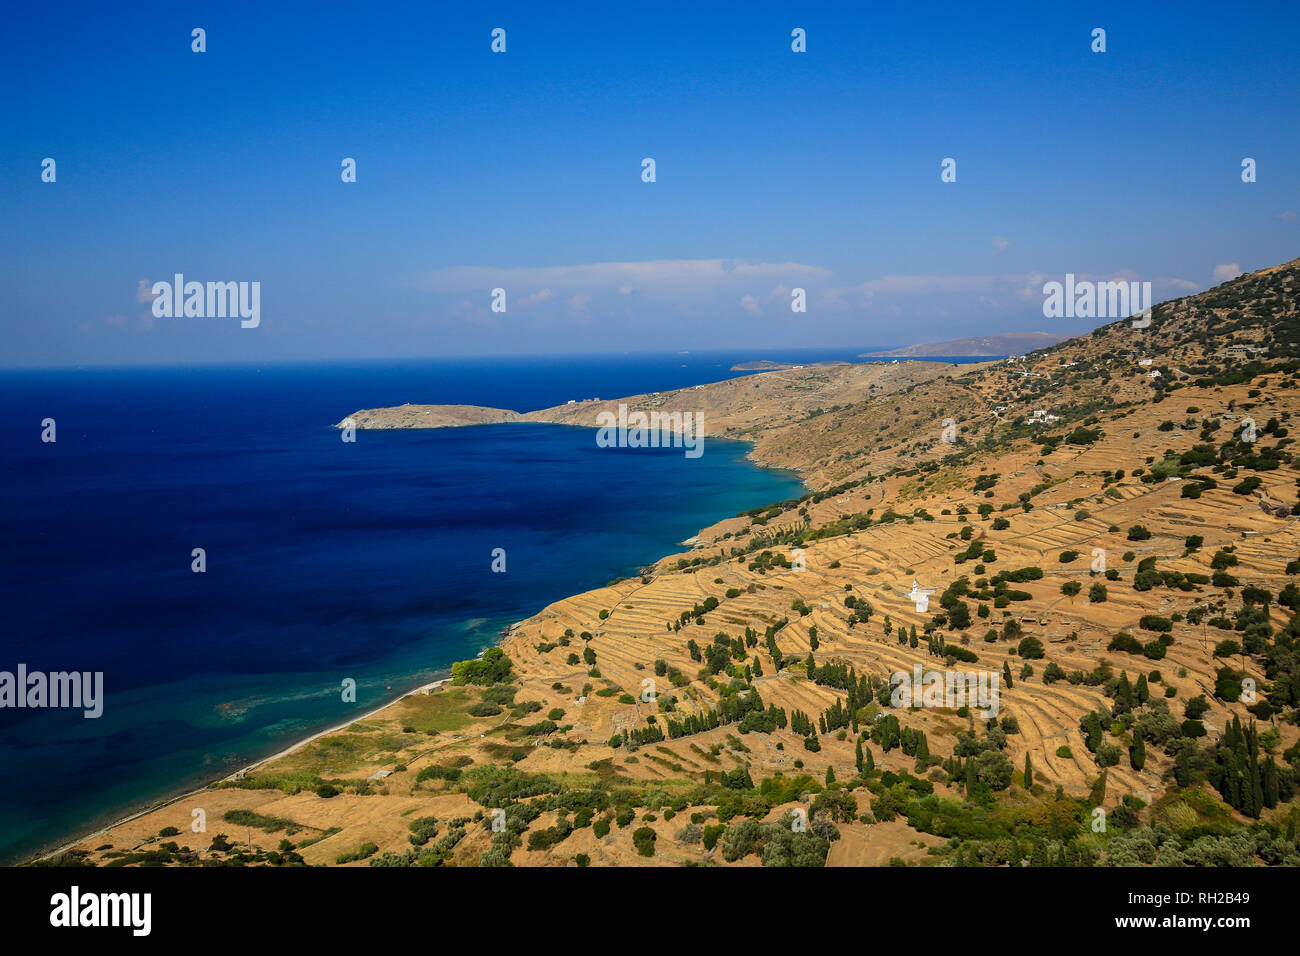 Island Andros, Cyclades, Greece - coastal landscape towards Kalamaki in the southwest of the island. Insel Andros, Kykladen, Griechenland - Kuestenlan Stock Photo